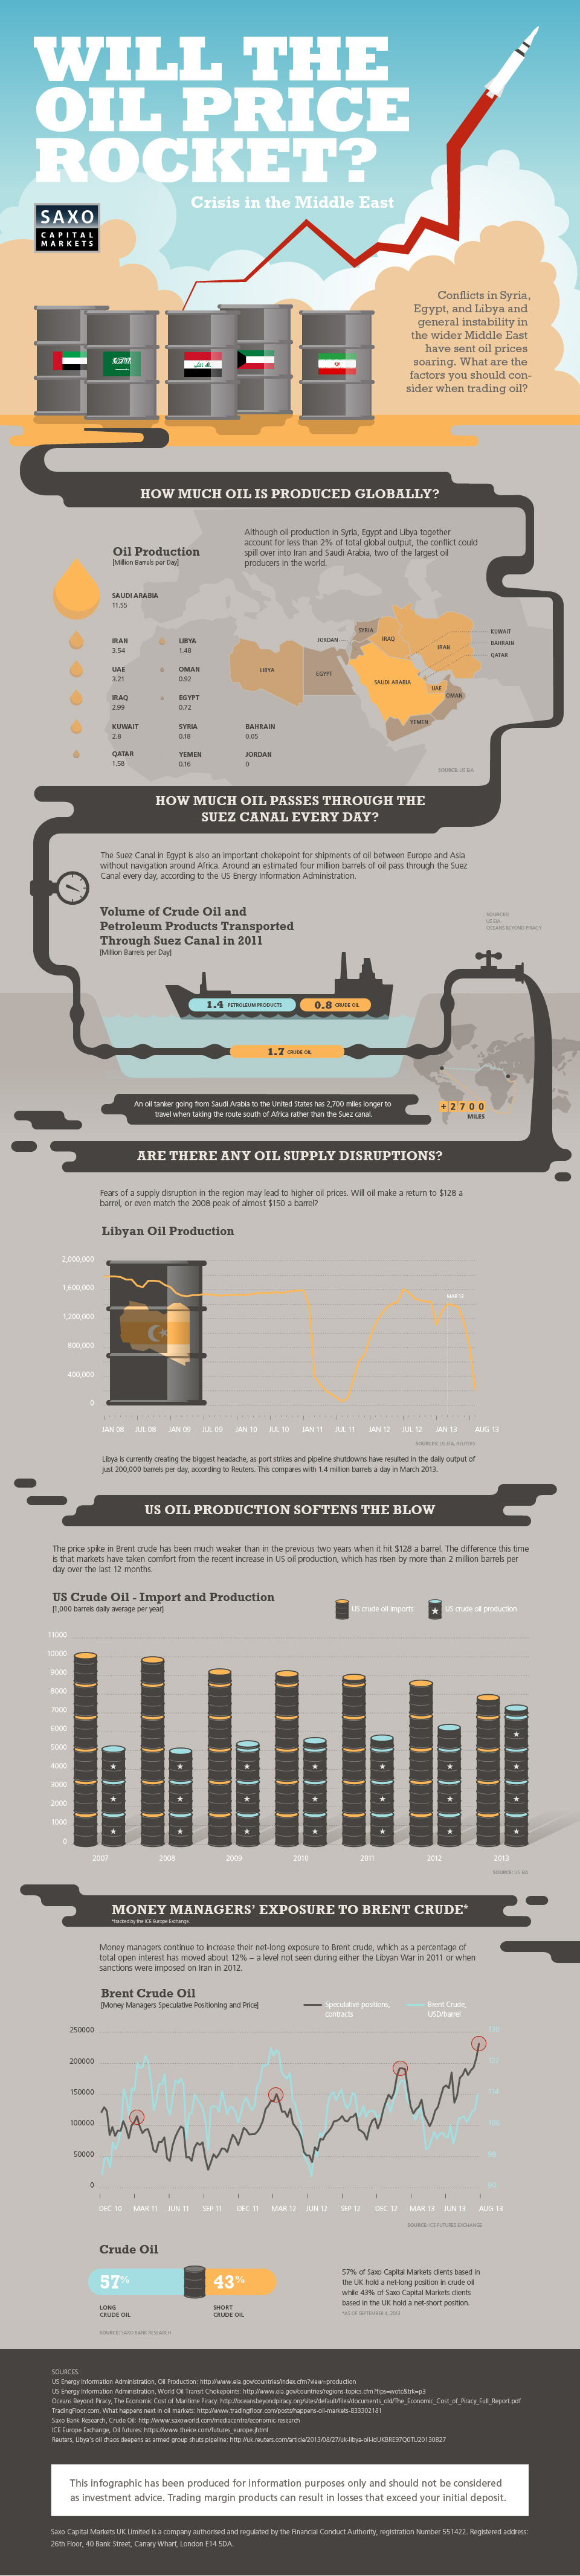 syria-crisis-oil-rockets-infographic-2013